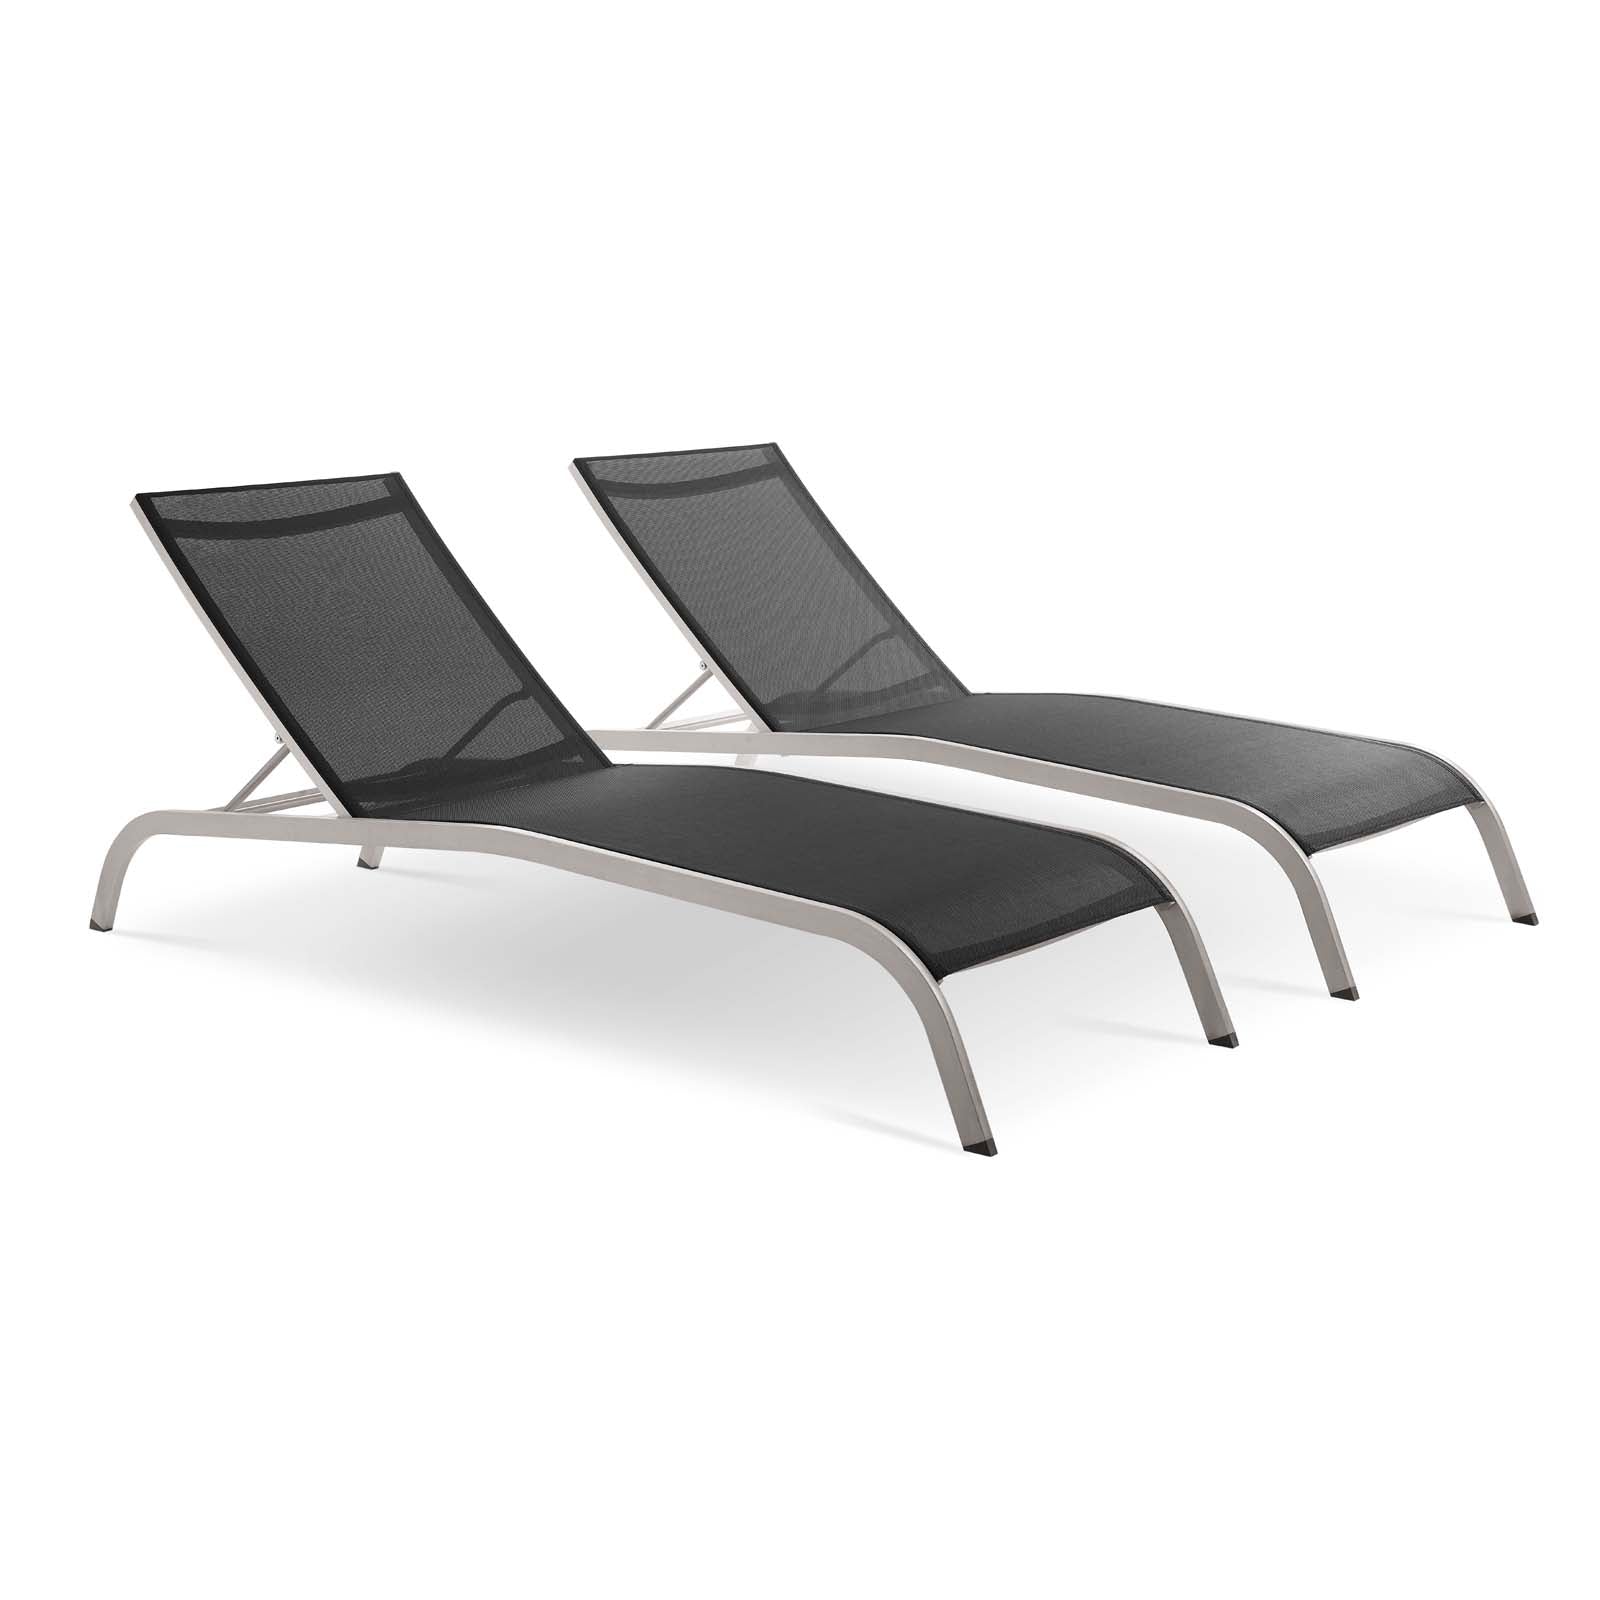 Modway Outdoor Loungers - Savannah Outdoor Patio Mesh Chaise Lounge Set of 2 Black